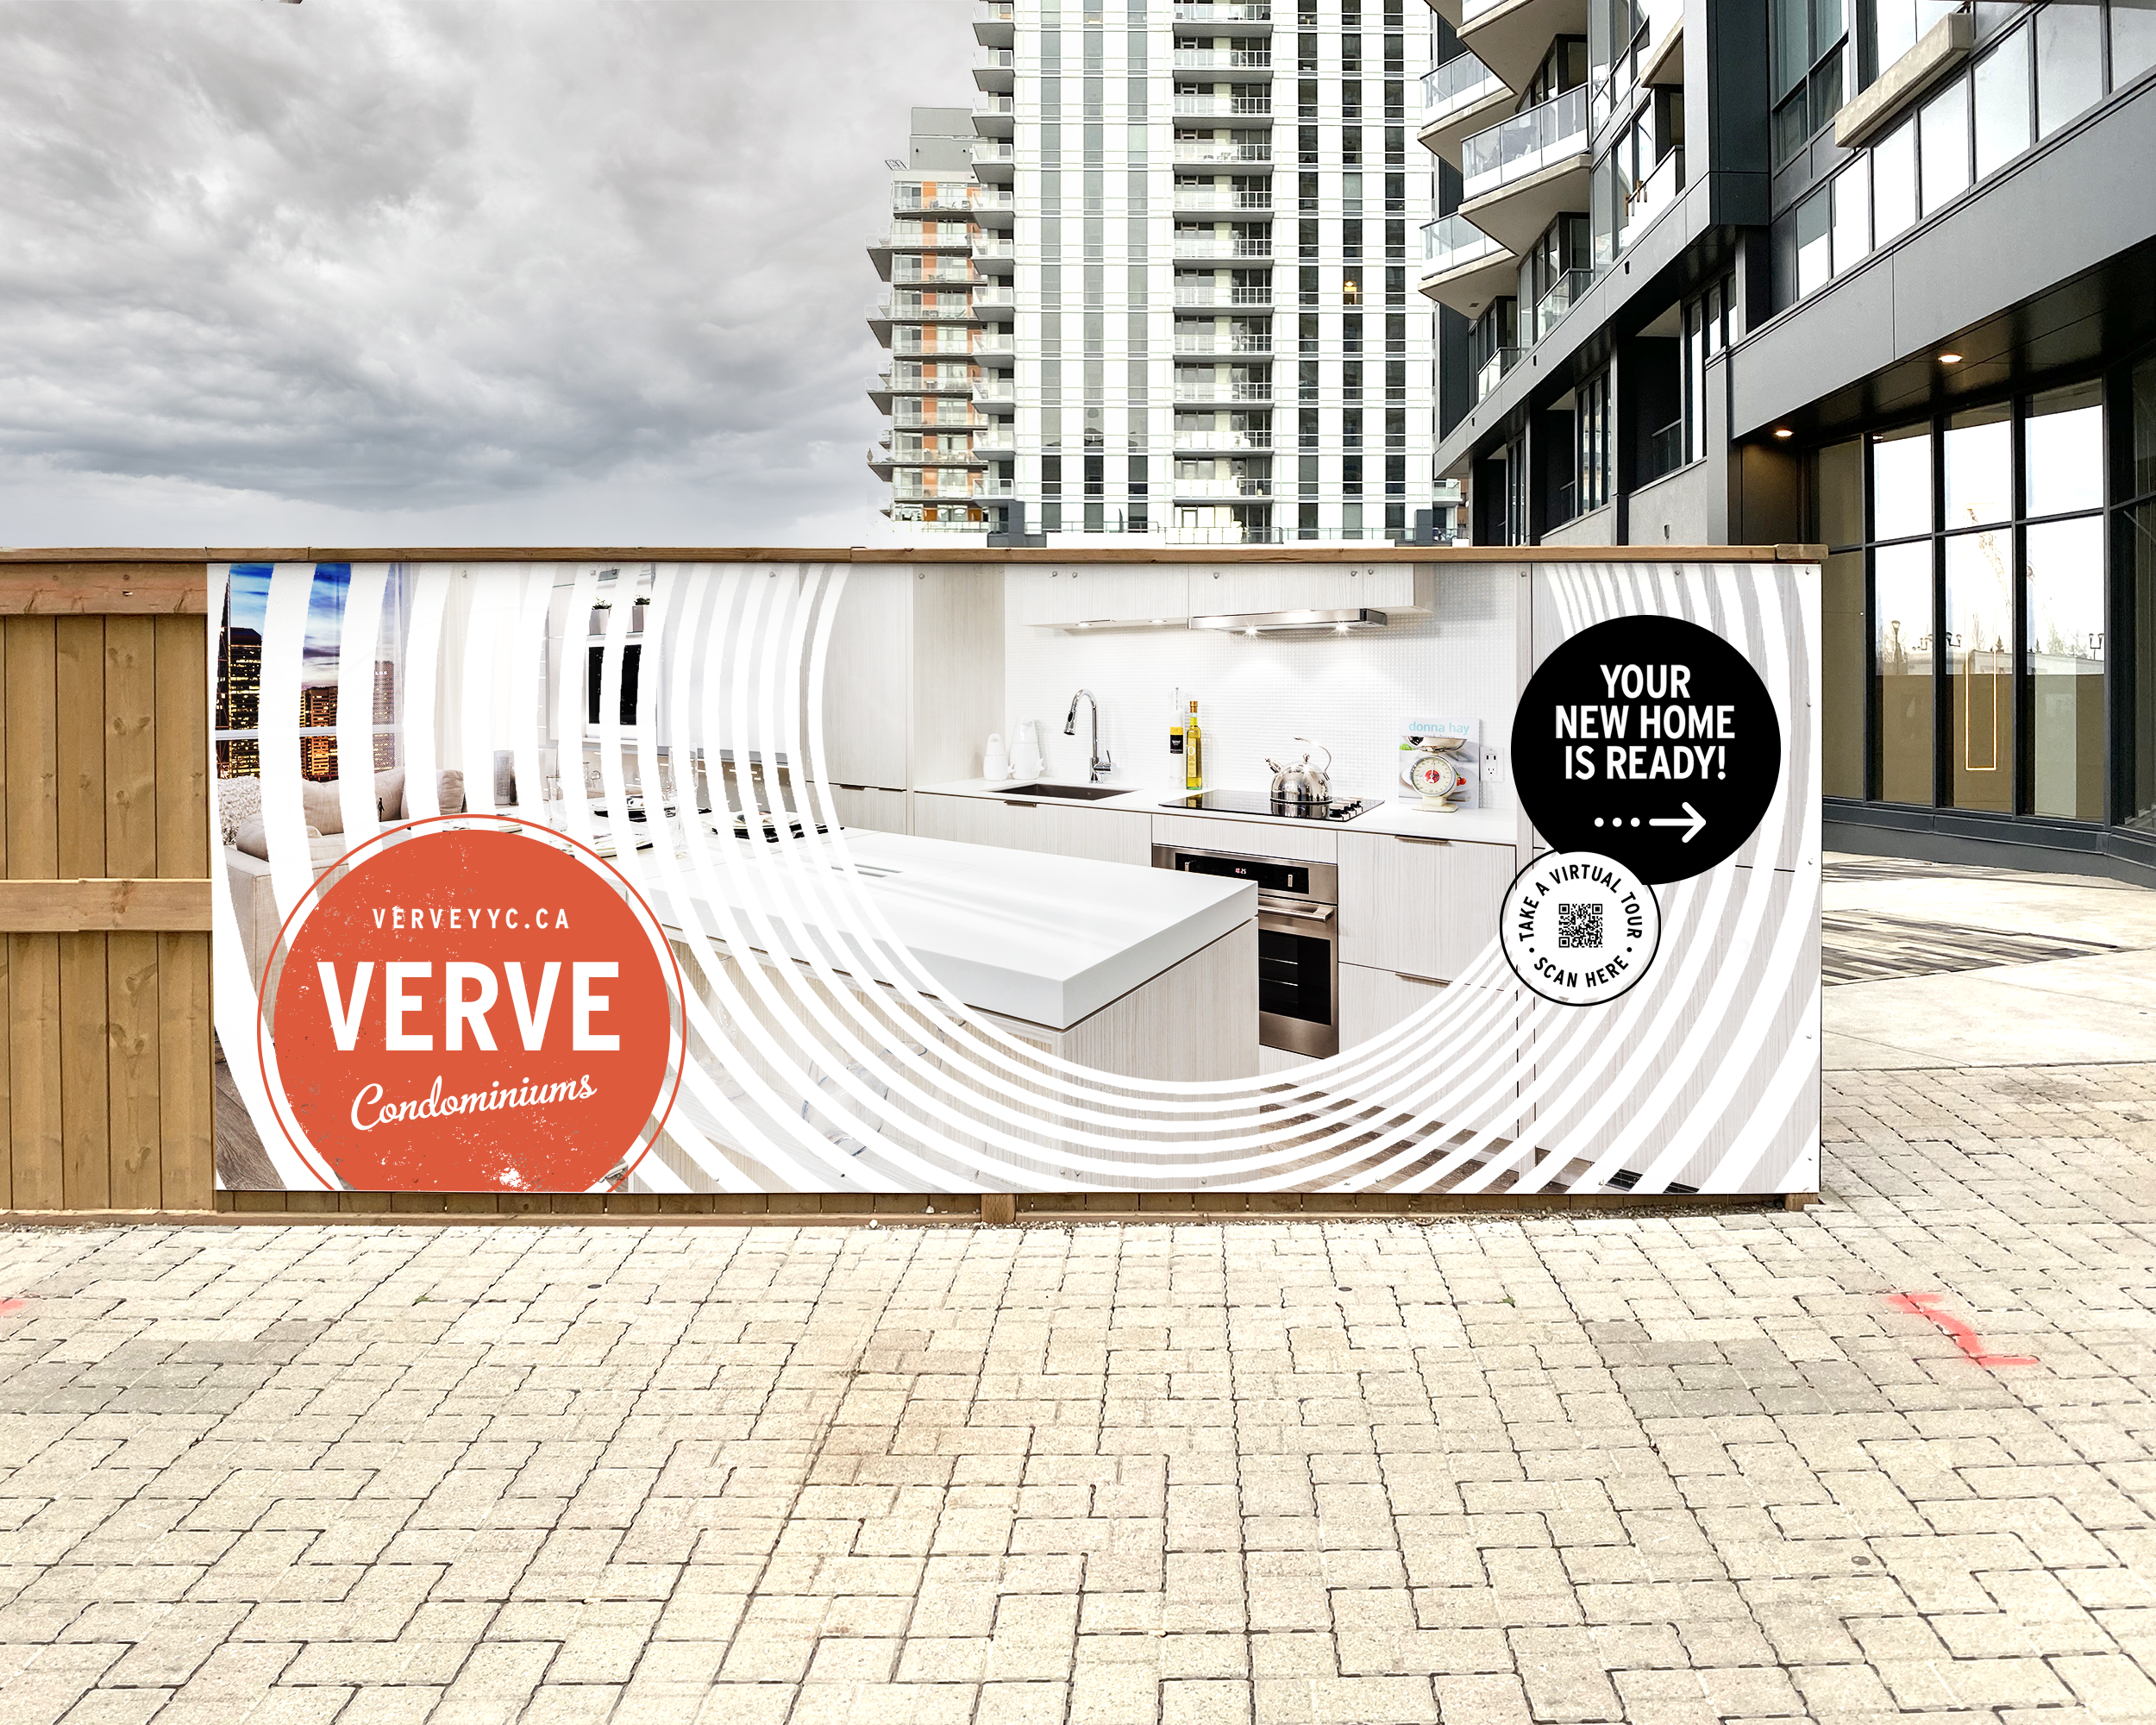 Verve out of home ad